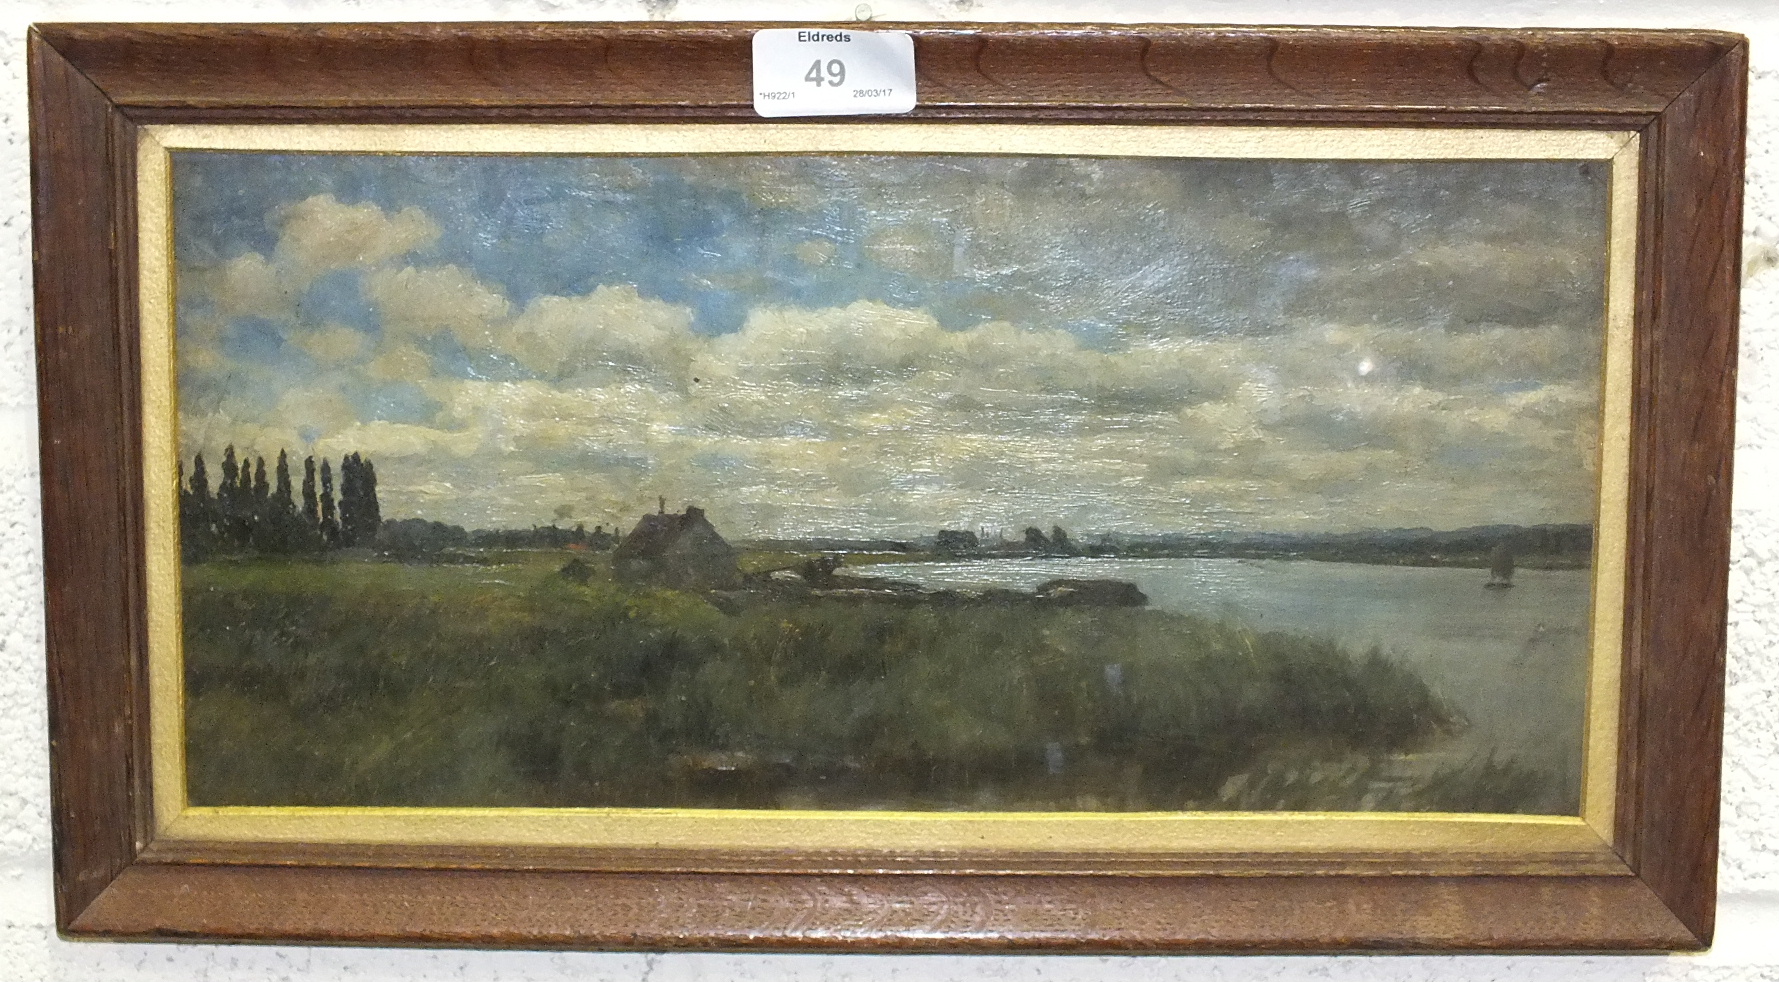 Attributed to Sir George Reid (1841 - 1913) A RIVER LANDSCAPE WITH A COTTAGE, A SMALL BOAT NEARBY